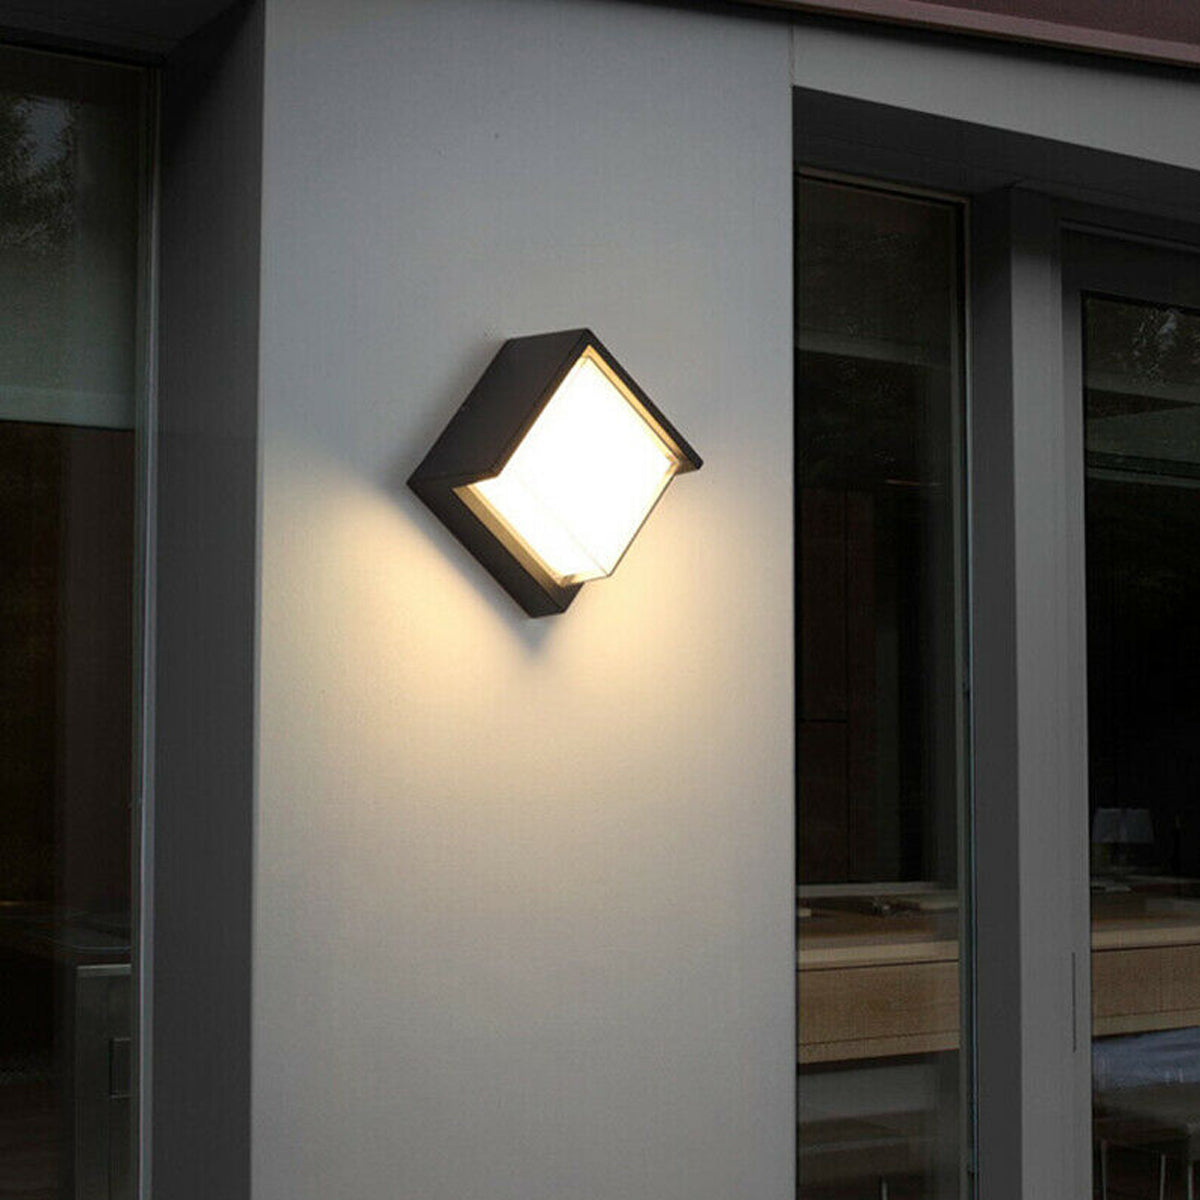 Sophia black and white square wall light is an modern simple fitting with a black polycarbonate body and opal diffuser. This stylish wall light is perfect for adding a pinch of modern flavour to doorways, sheds, patios, porch, driveways, garages, sheds, and more. This fitting is IP65 rated which makes it fully weatherproof light fitting.